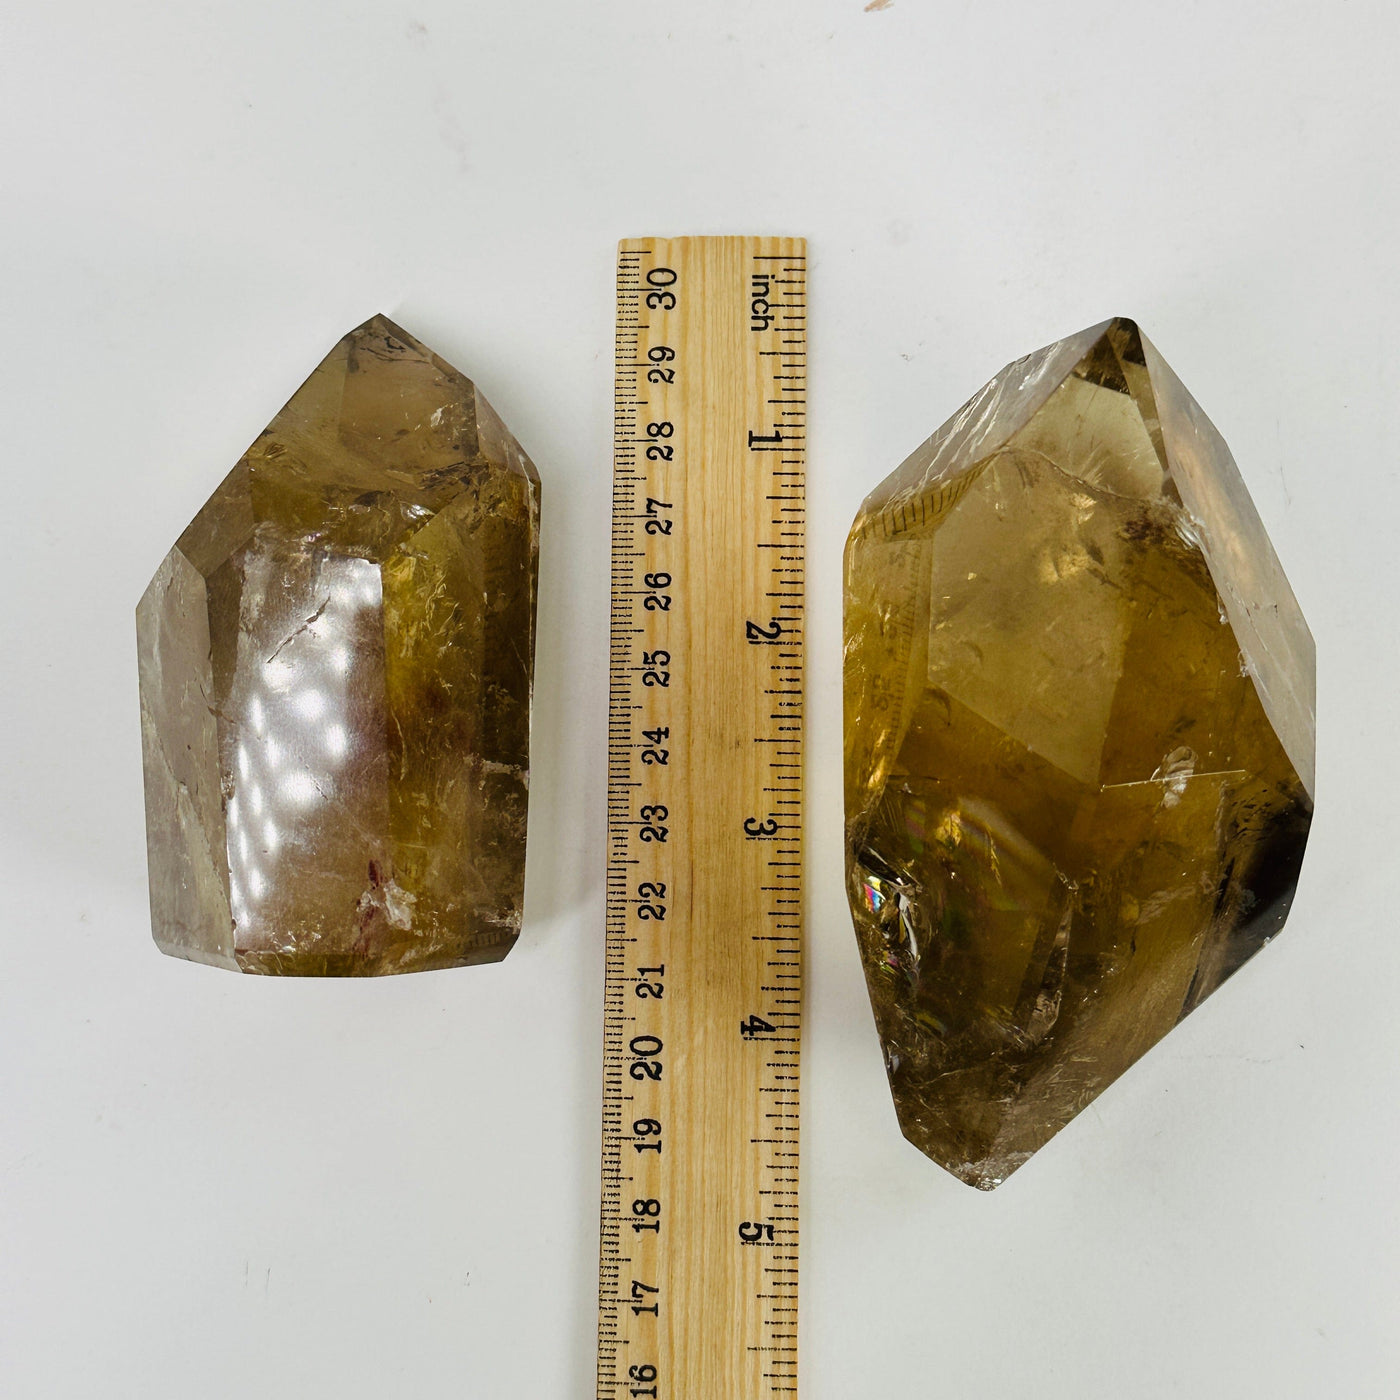 Citrine points next to a ruler for size reference